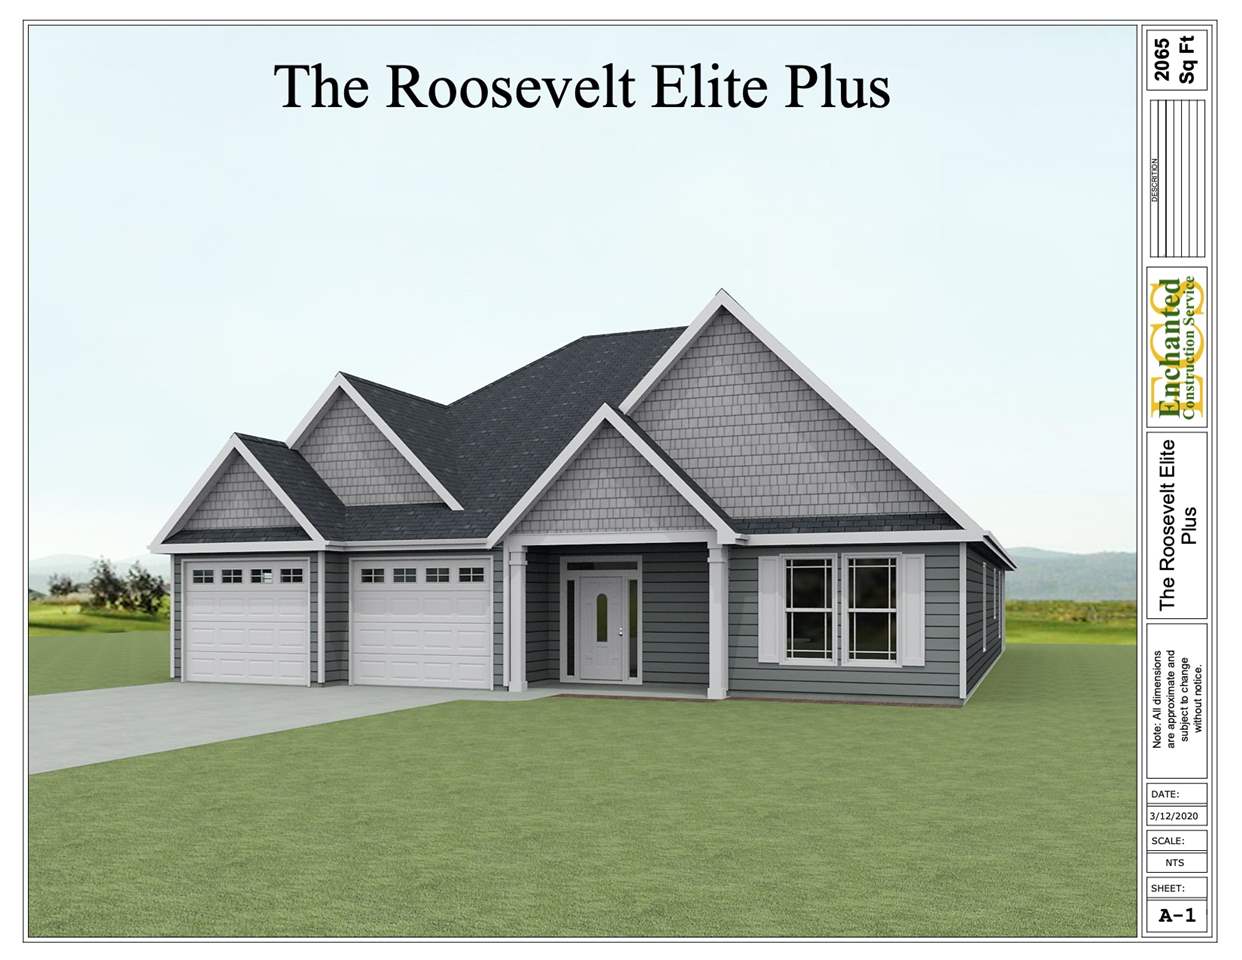 The Rosevelt Elite with basement has almost 3000 Square Feet. Be one of the first in this lake community Bruce Harbor. The Roosevelt Elite on a finished basement will feature 4 Bedrooms 3 Bath with multiple living rooms and office. This home will feature granite counter tops, 5 inch engineered hardwood floors, crown molding, and a covered patio off the master bedroom. Choose this home or one of many homes in this neighborhood. Want to build custom bring your plan and let us price it on one of our lots. Please note “Private landing strip in near vicinity of property.”